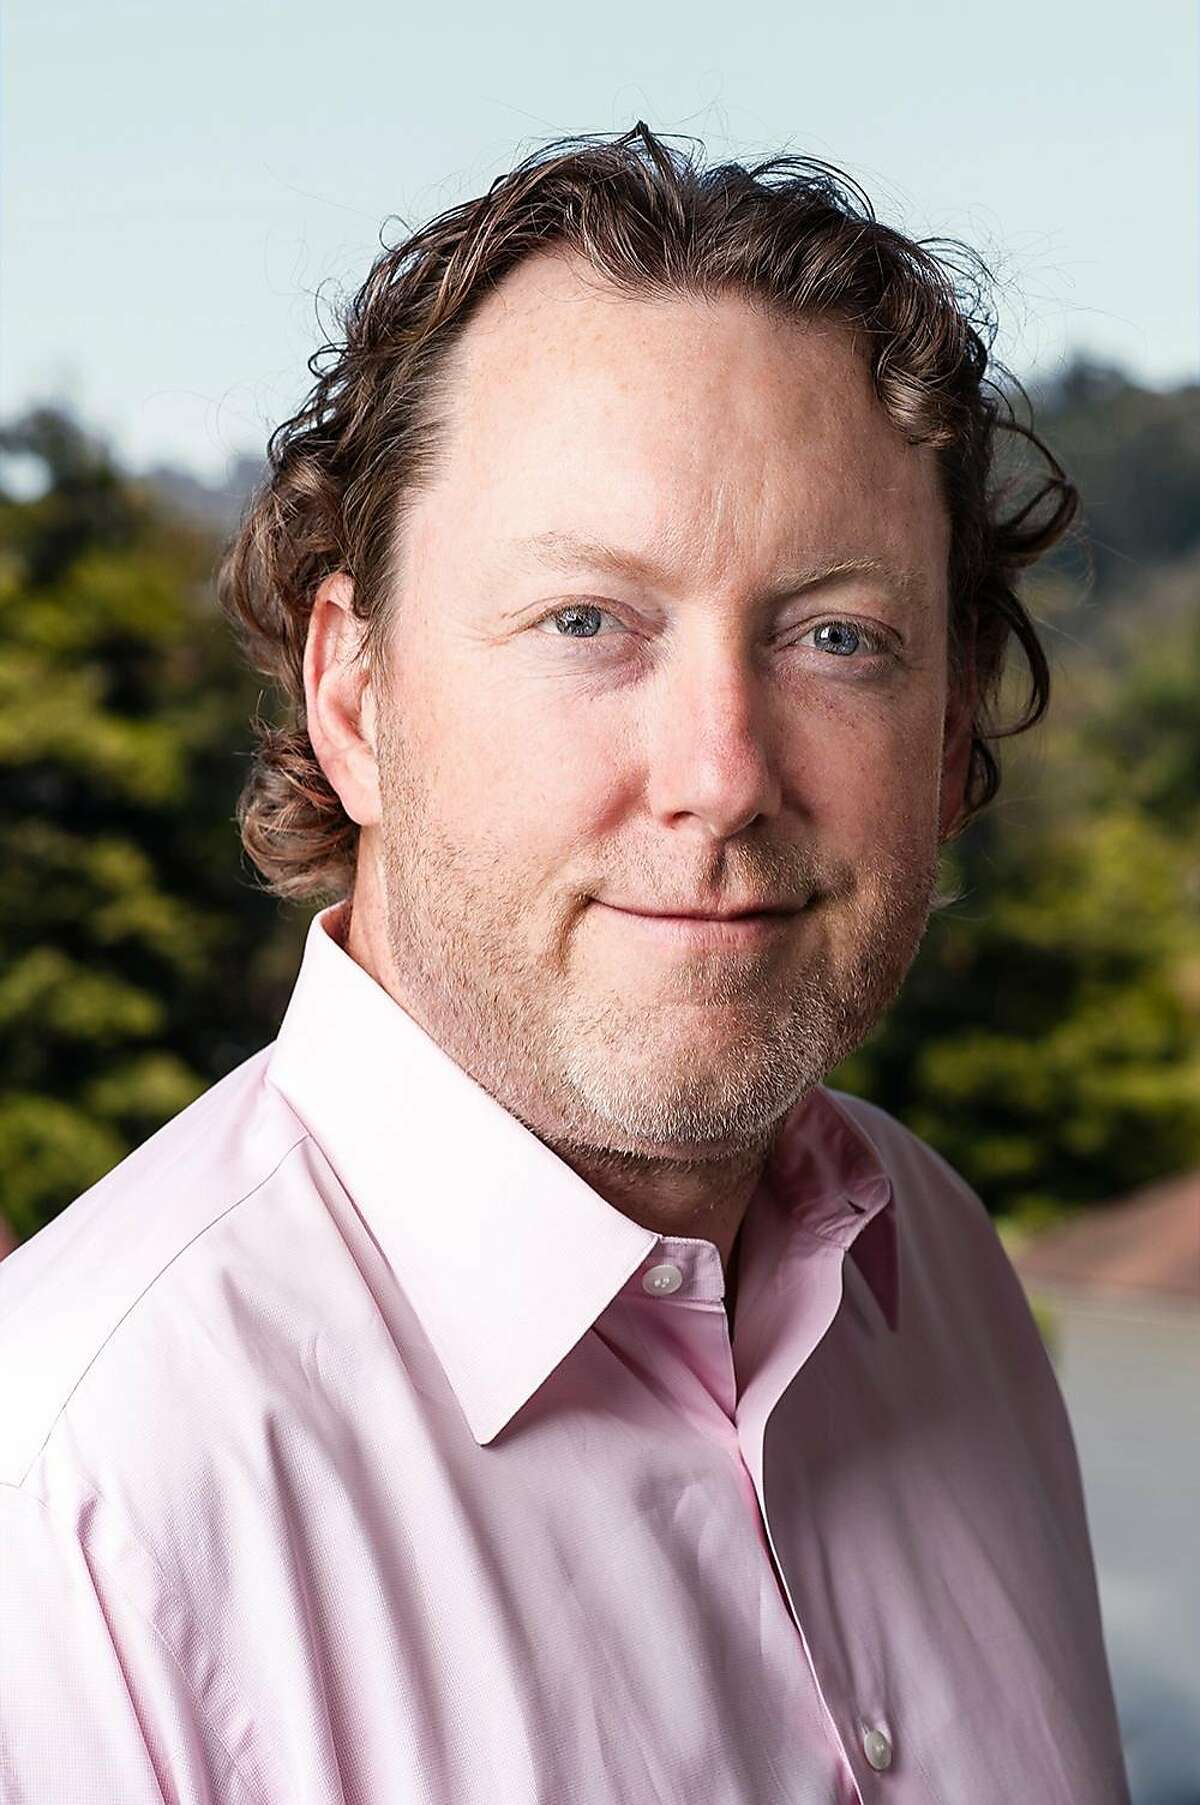 SoFi former Chief Executive Officer Mike Cagney